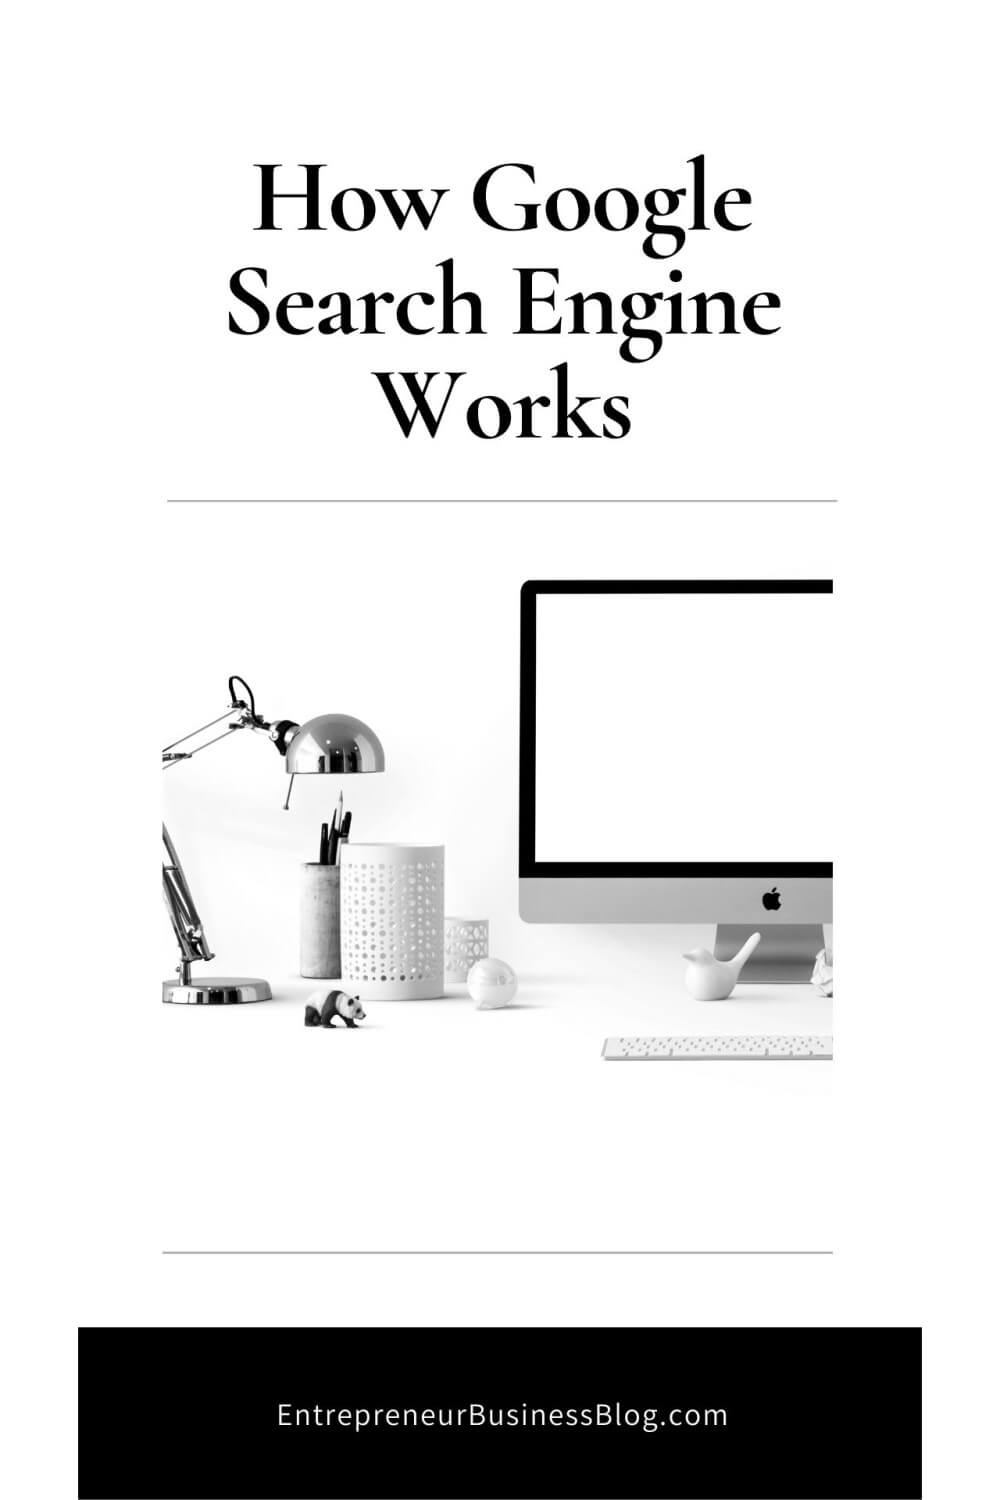 How Google Search Engine Works